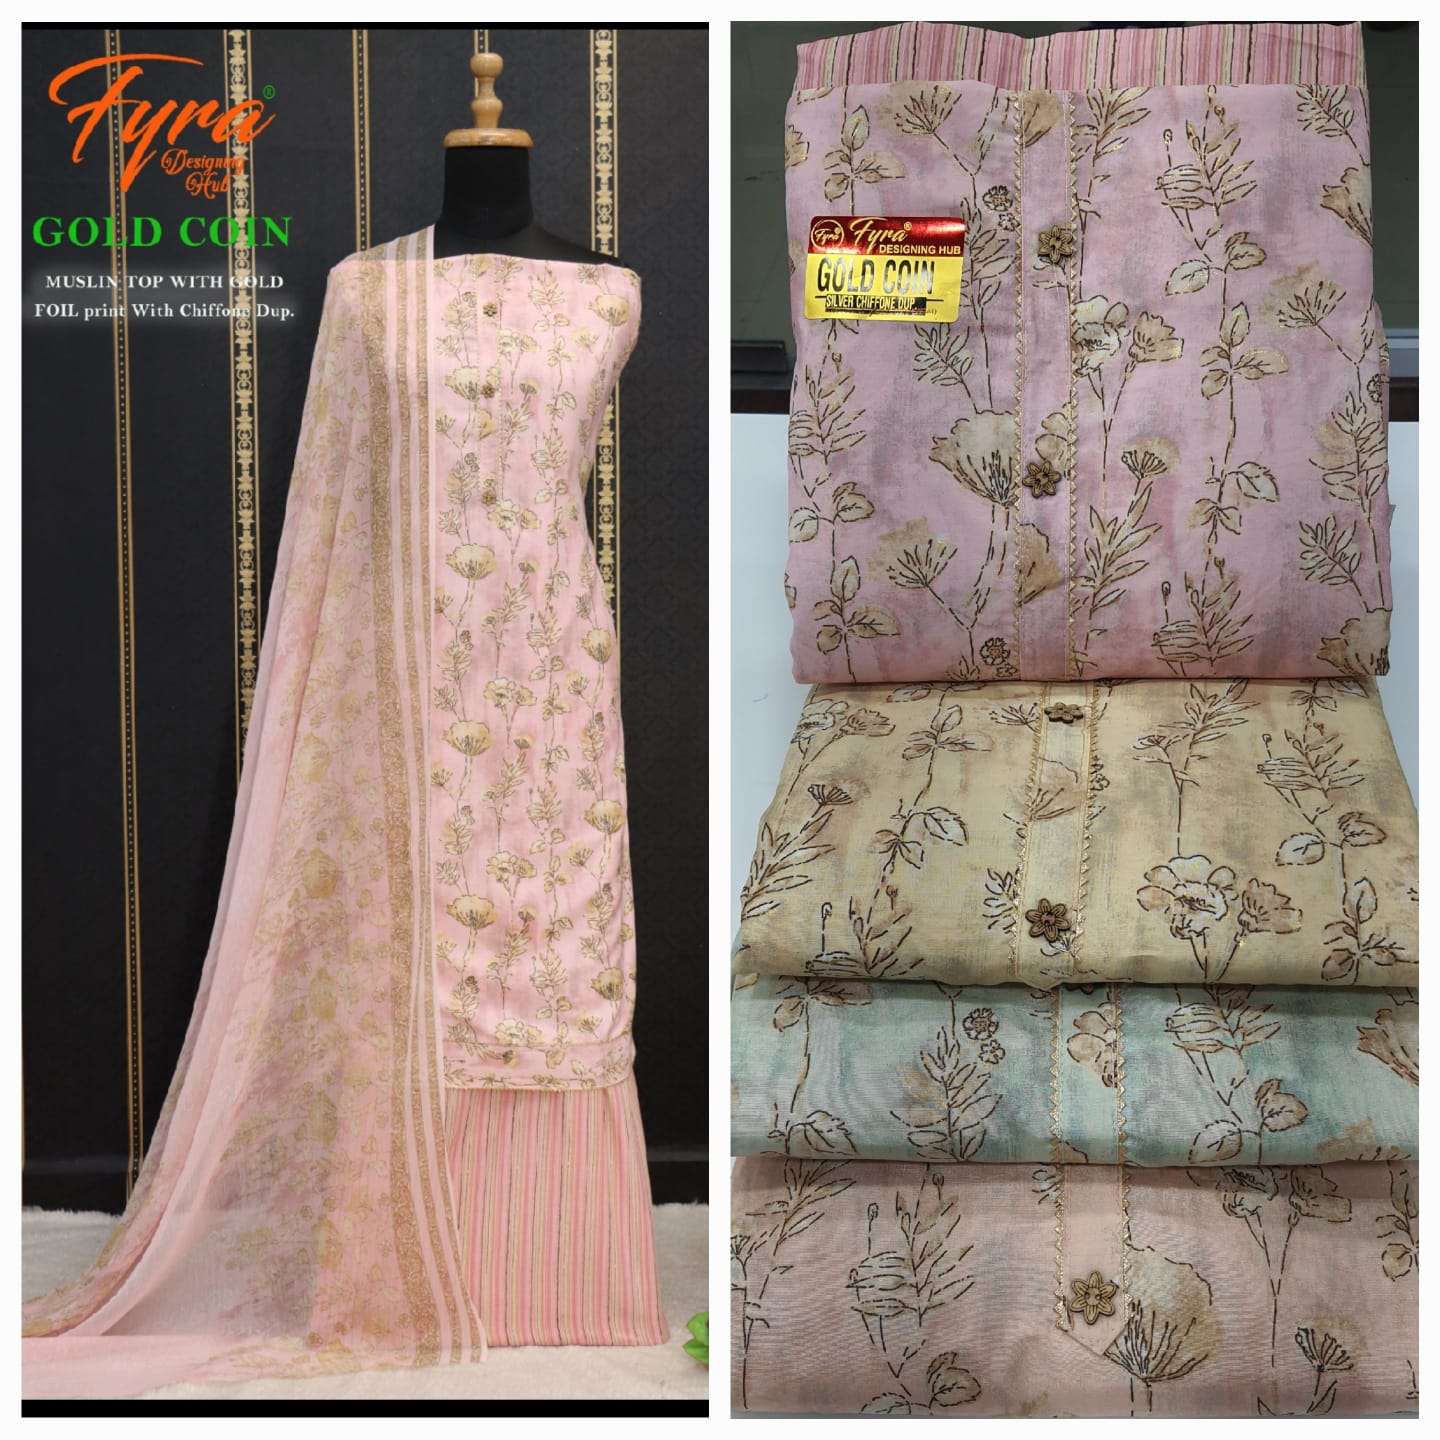 Alok Suits Fyra Gold Coin Vol 1 Maslin Silk with Printed Sal...